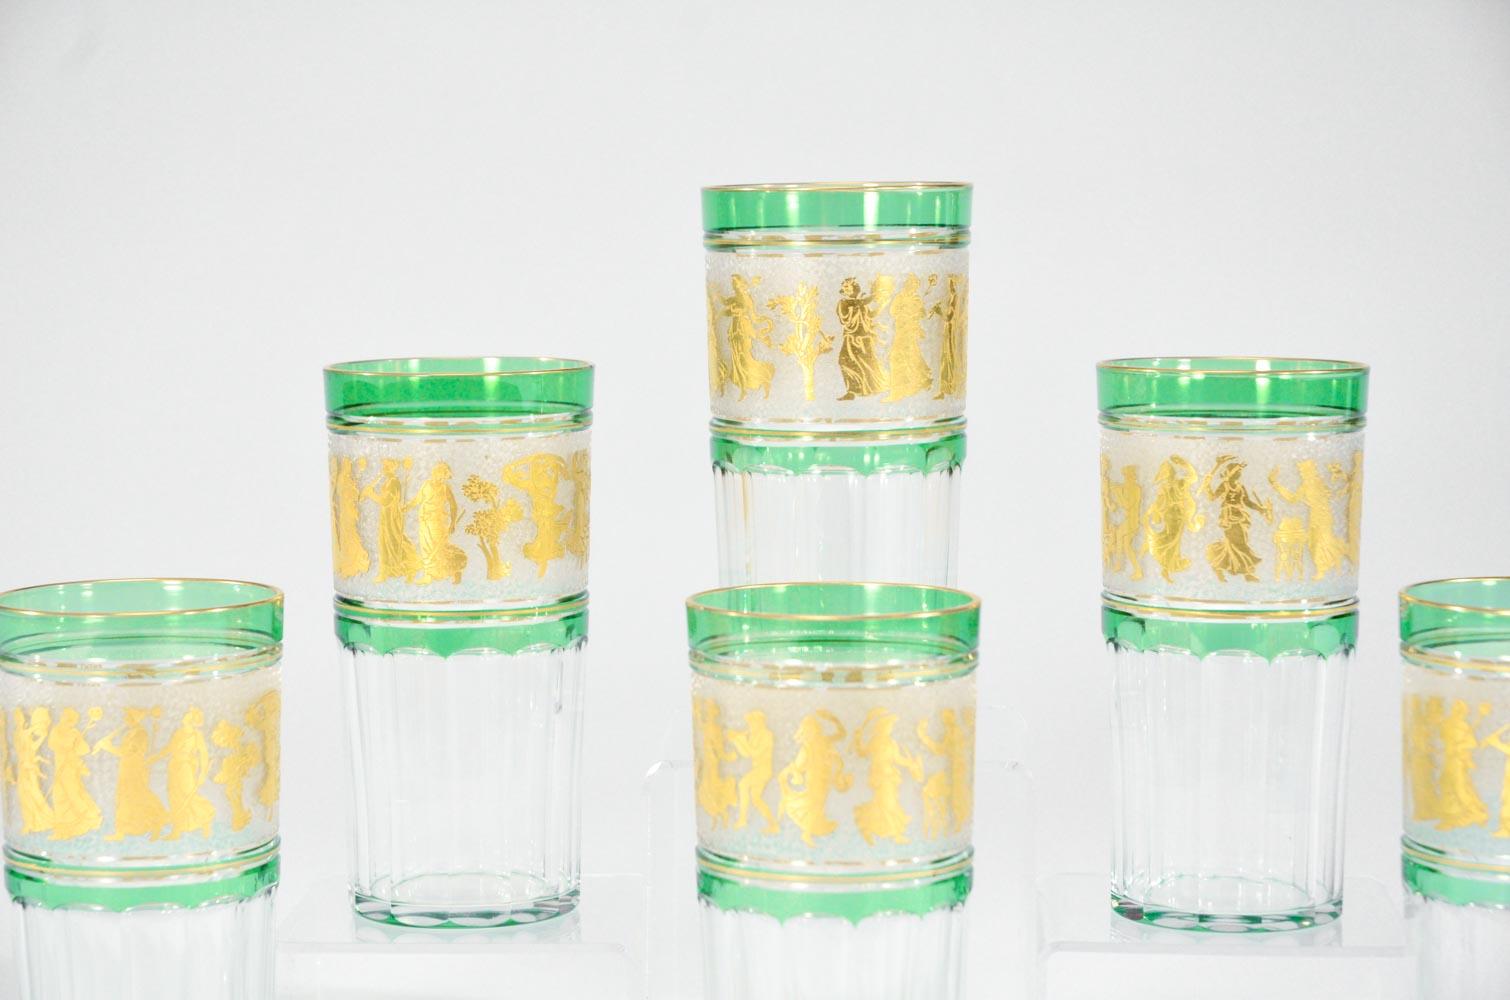 This is a magnificent set of 6 rare sized and rare colored tumblers made by Val St. Lambert. Each one is hand blown with apple green crystal overlay, cut to clear with cameo cut frieze of Roman figures embellished with gold leaf. This pattern is one